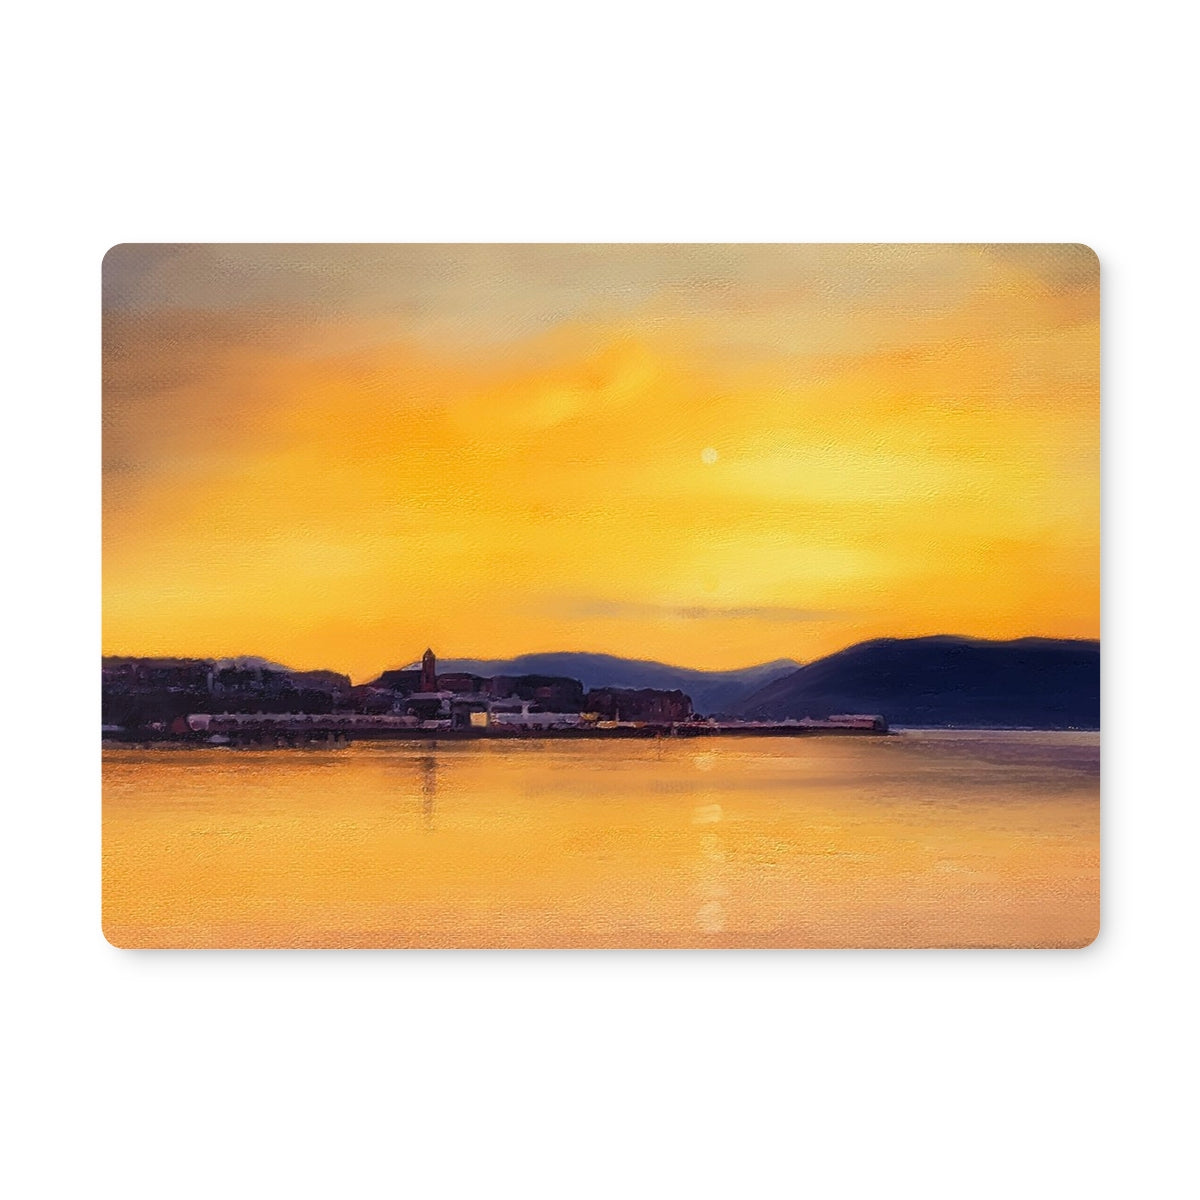 Gourock From Cardwell Bay Art Gifts Placemat-Placemats-River Clyde Art Gallery-2 Placemats-Paintings, Prints, Homeware, Art Gifts From Scotland By Scottish Artist Kevin Hunter